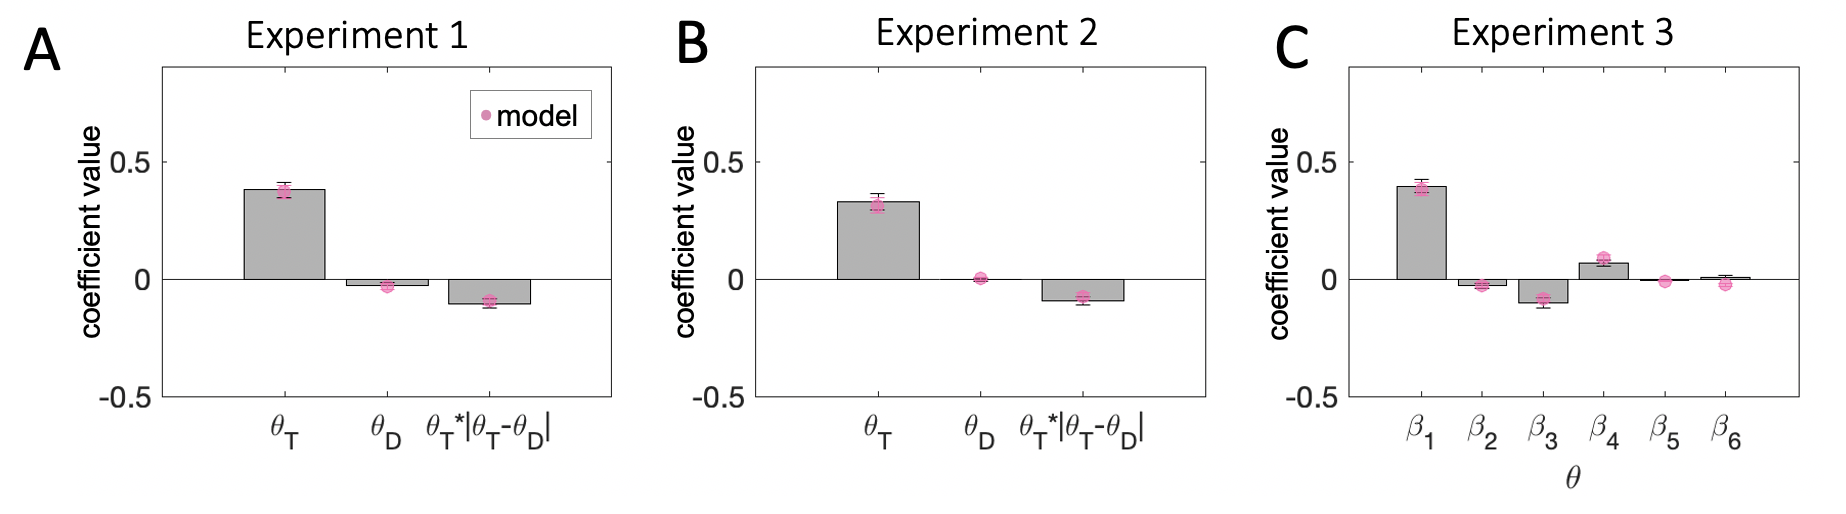 Model fits to human data. $\textbf{A:}$ Experiment 1. $\textbf{B:}$ Experiment 2. $\textbf{C:}$ Experiment 3. Across all three experiments bars correspond to coefficients from a regression on human choices and pink circles correspond to model-simulated choices with free parameters estimated to best fit human data. Error bars correspond to standard errors of the mean. Coefficient labels in Experiment 3 are as in the regression analysis plot.